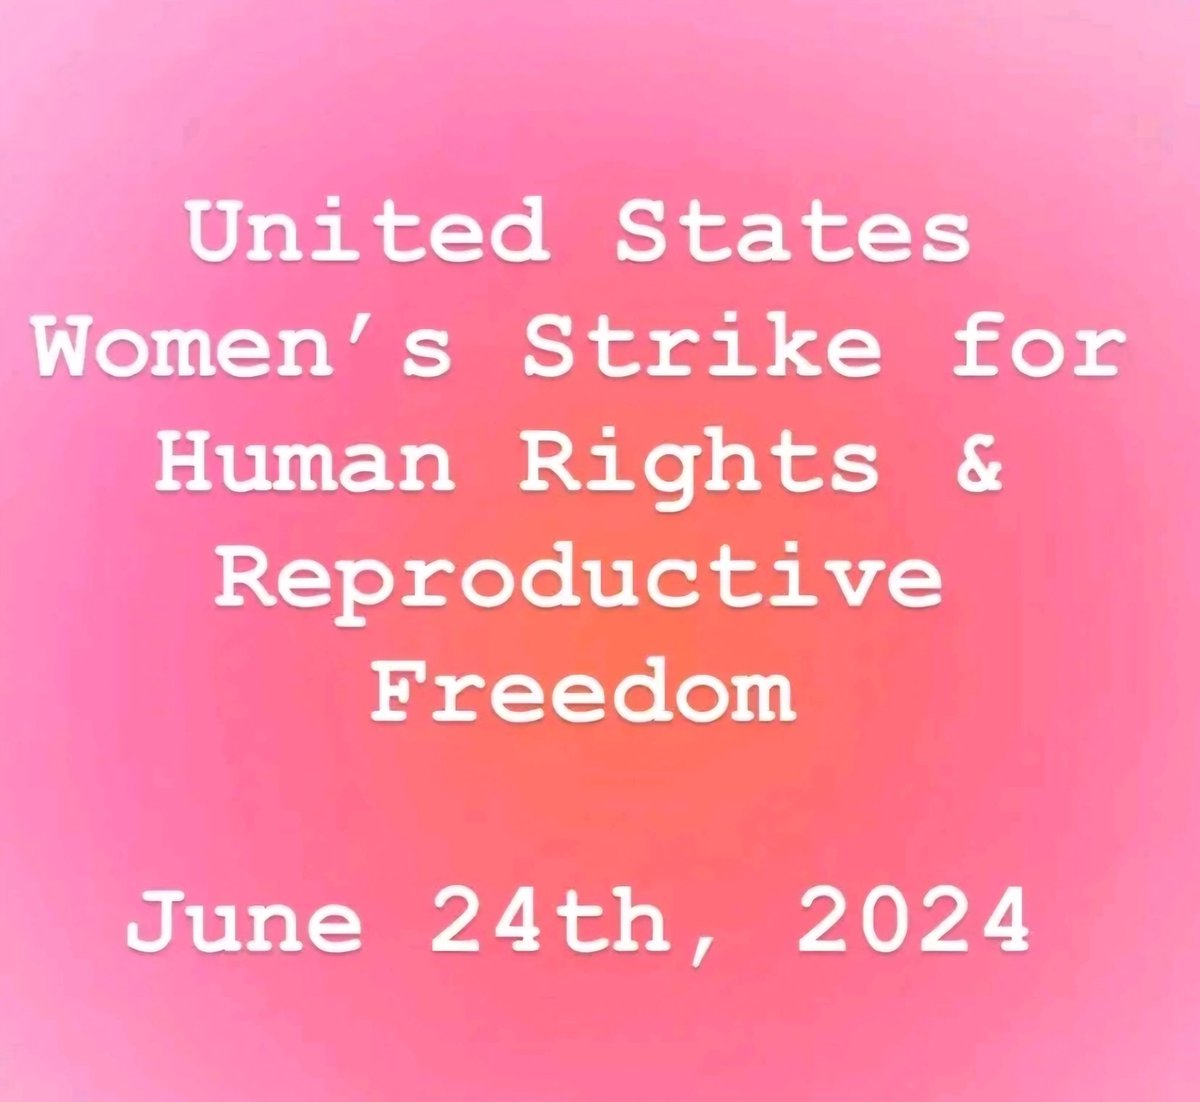 Some upcoming protest & strike information for those who may be interested. #EndHomelessness #AbortionIsHealthcare #ReproductiveRights #MyBodyMyChoice #OpJane #OpGOP